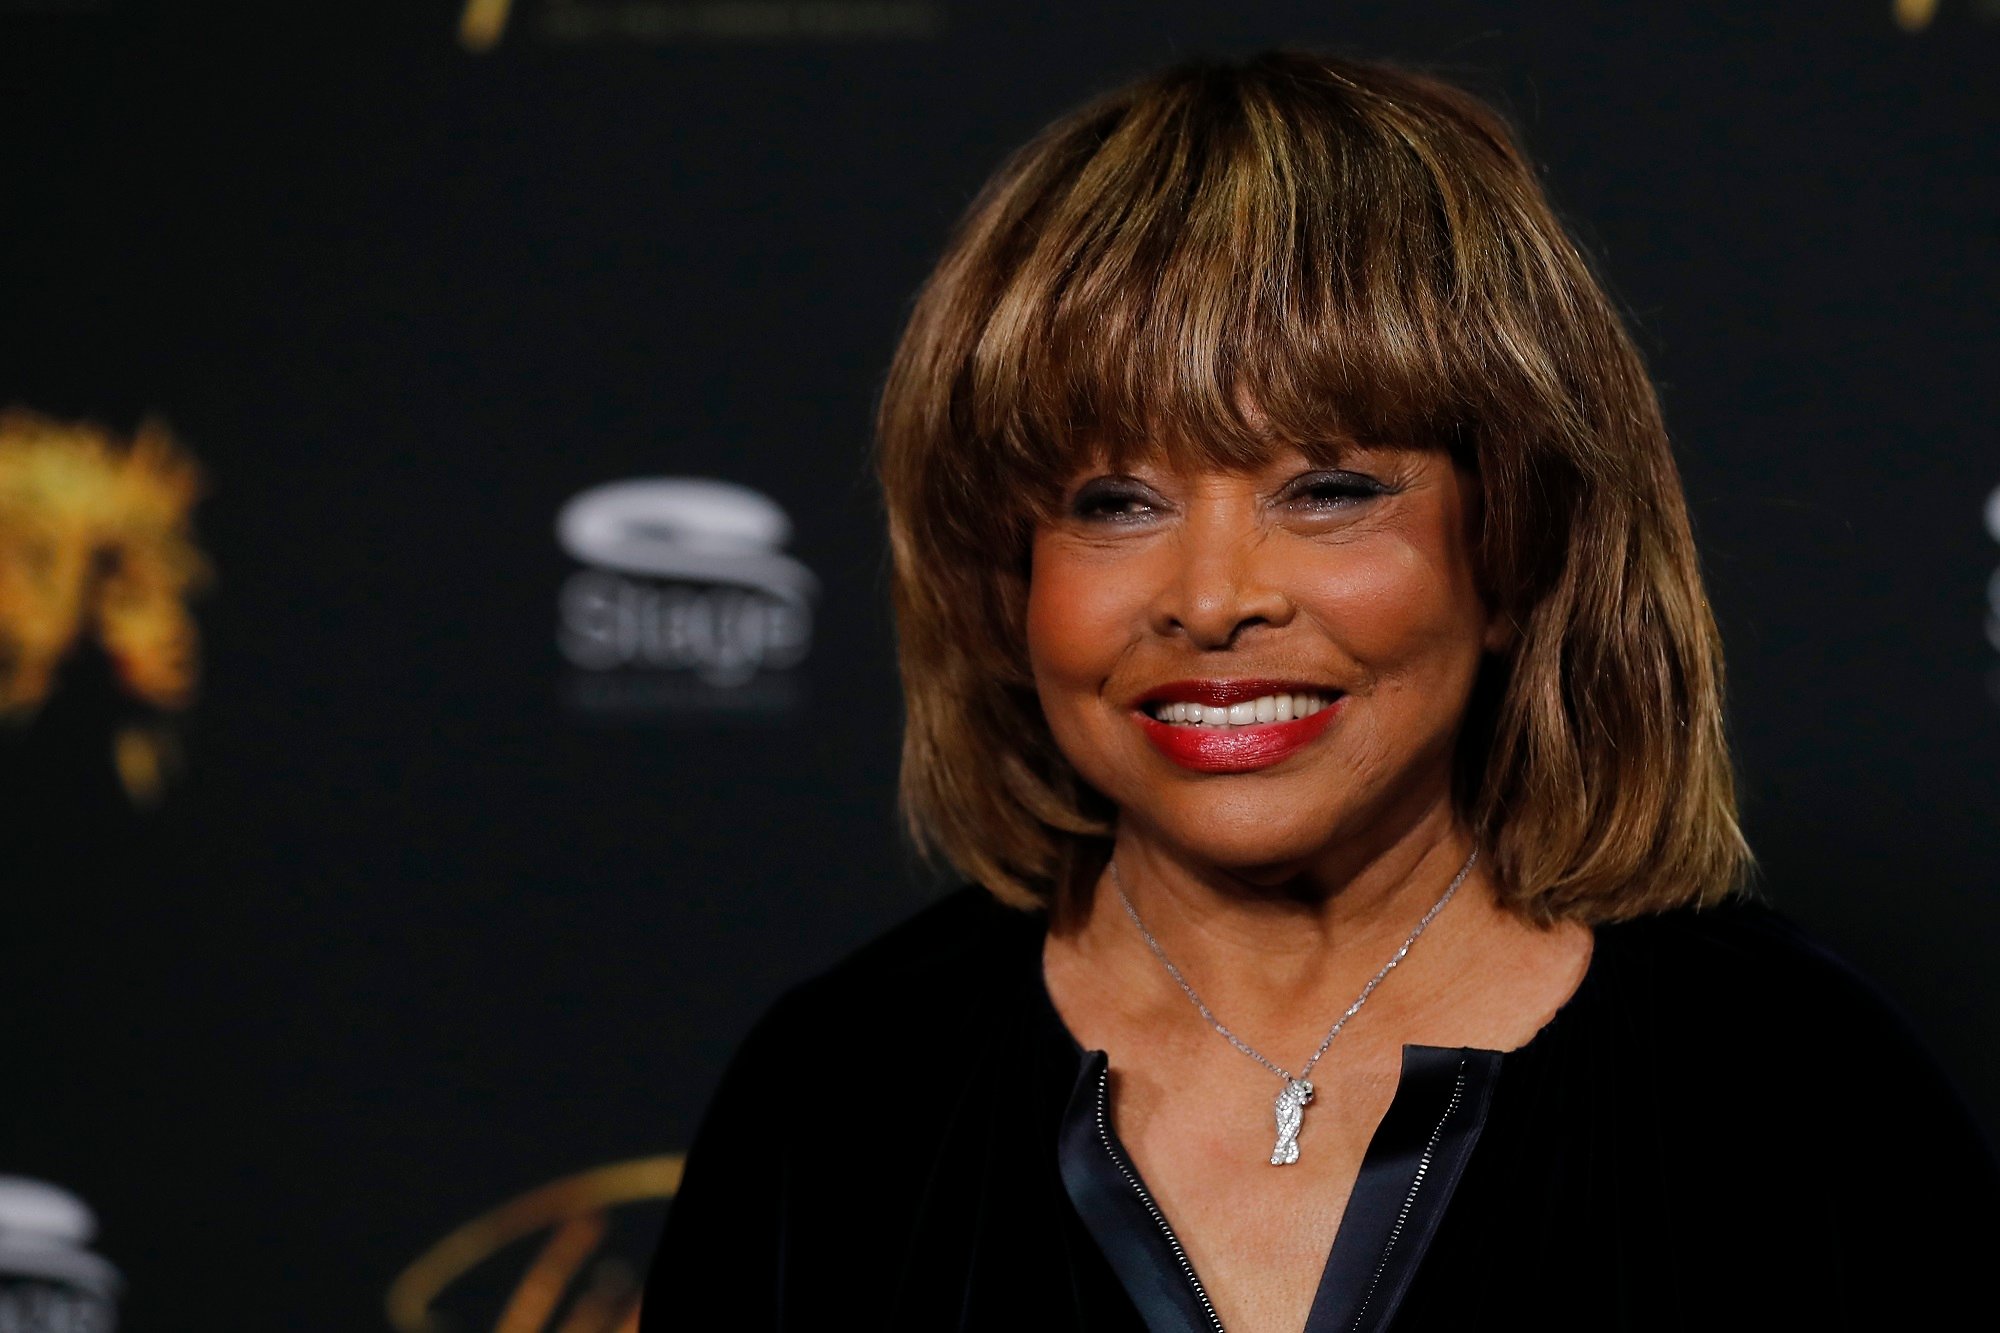 Tina Turner on the red carpet for Tina: The Musical